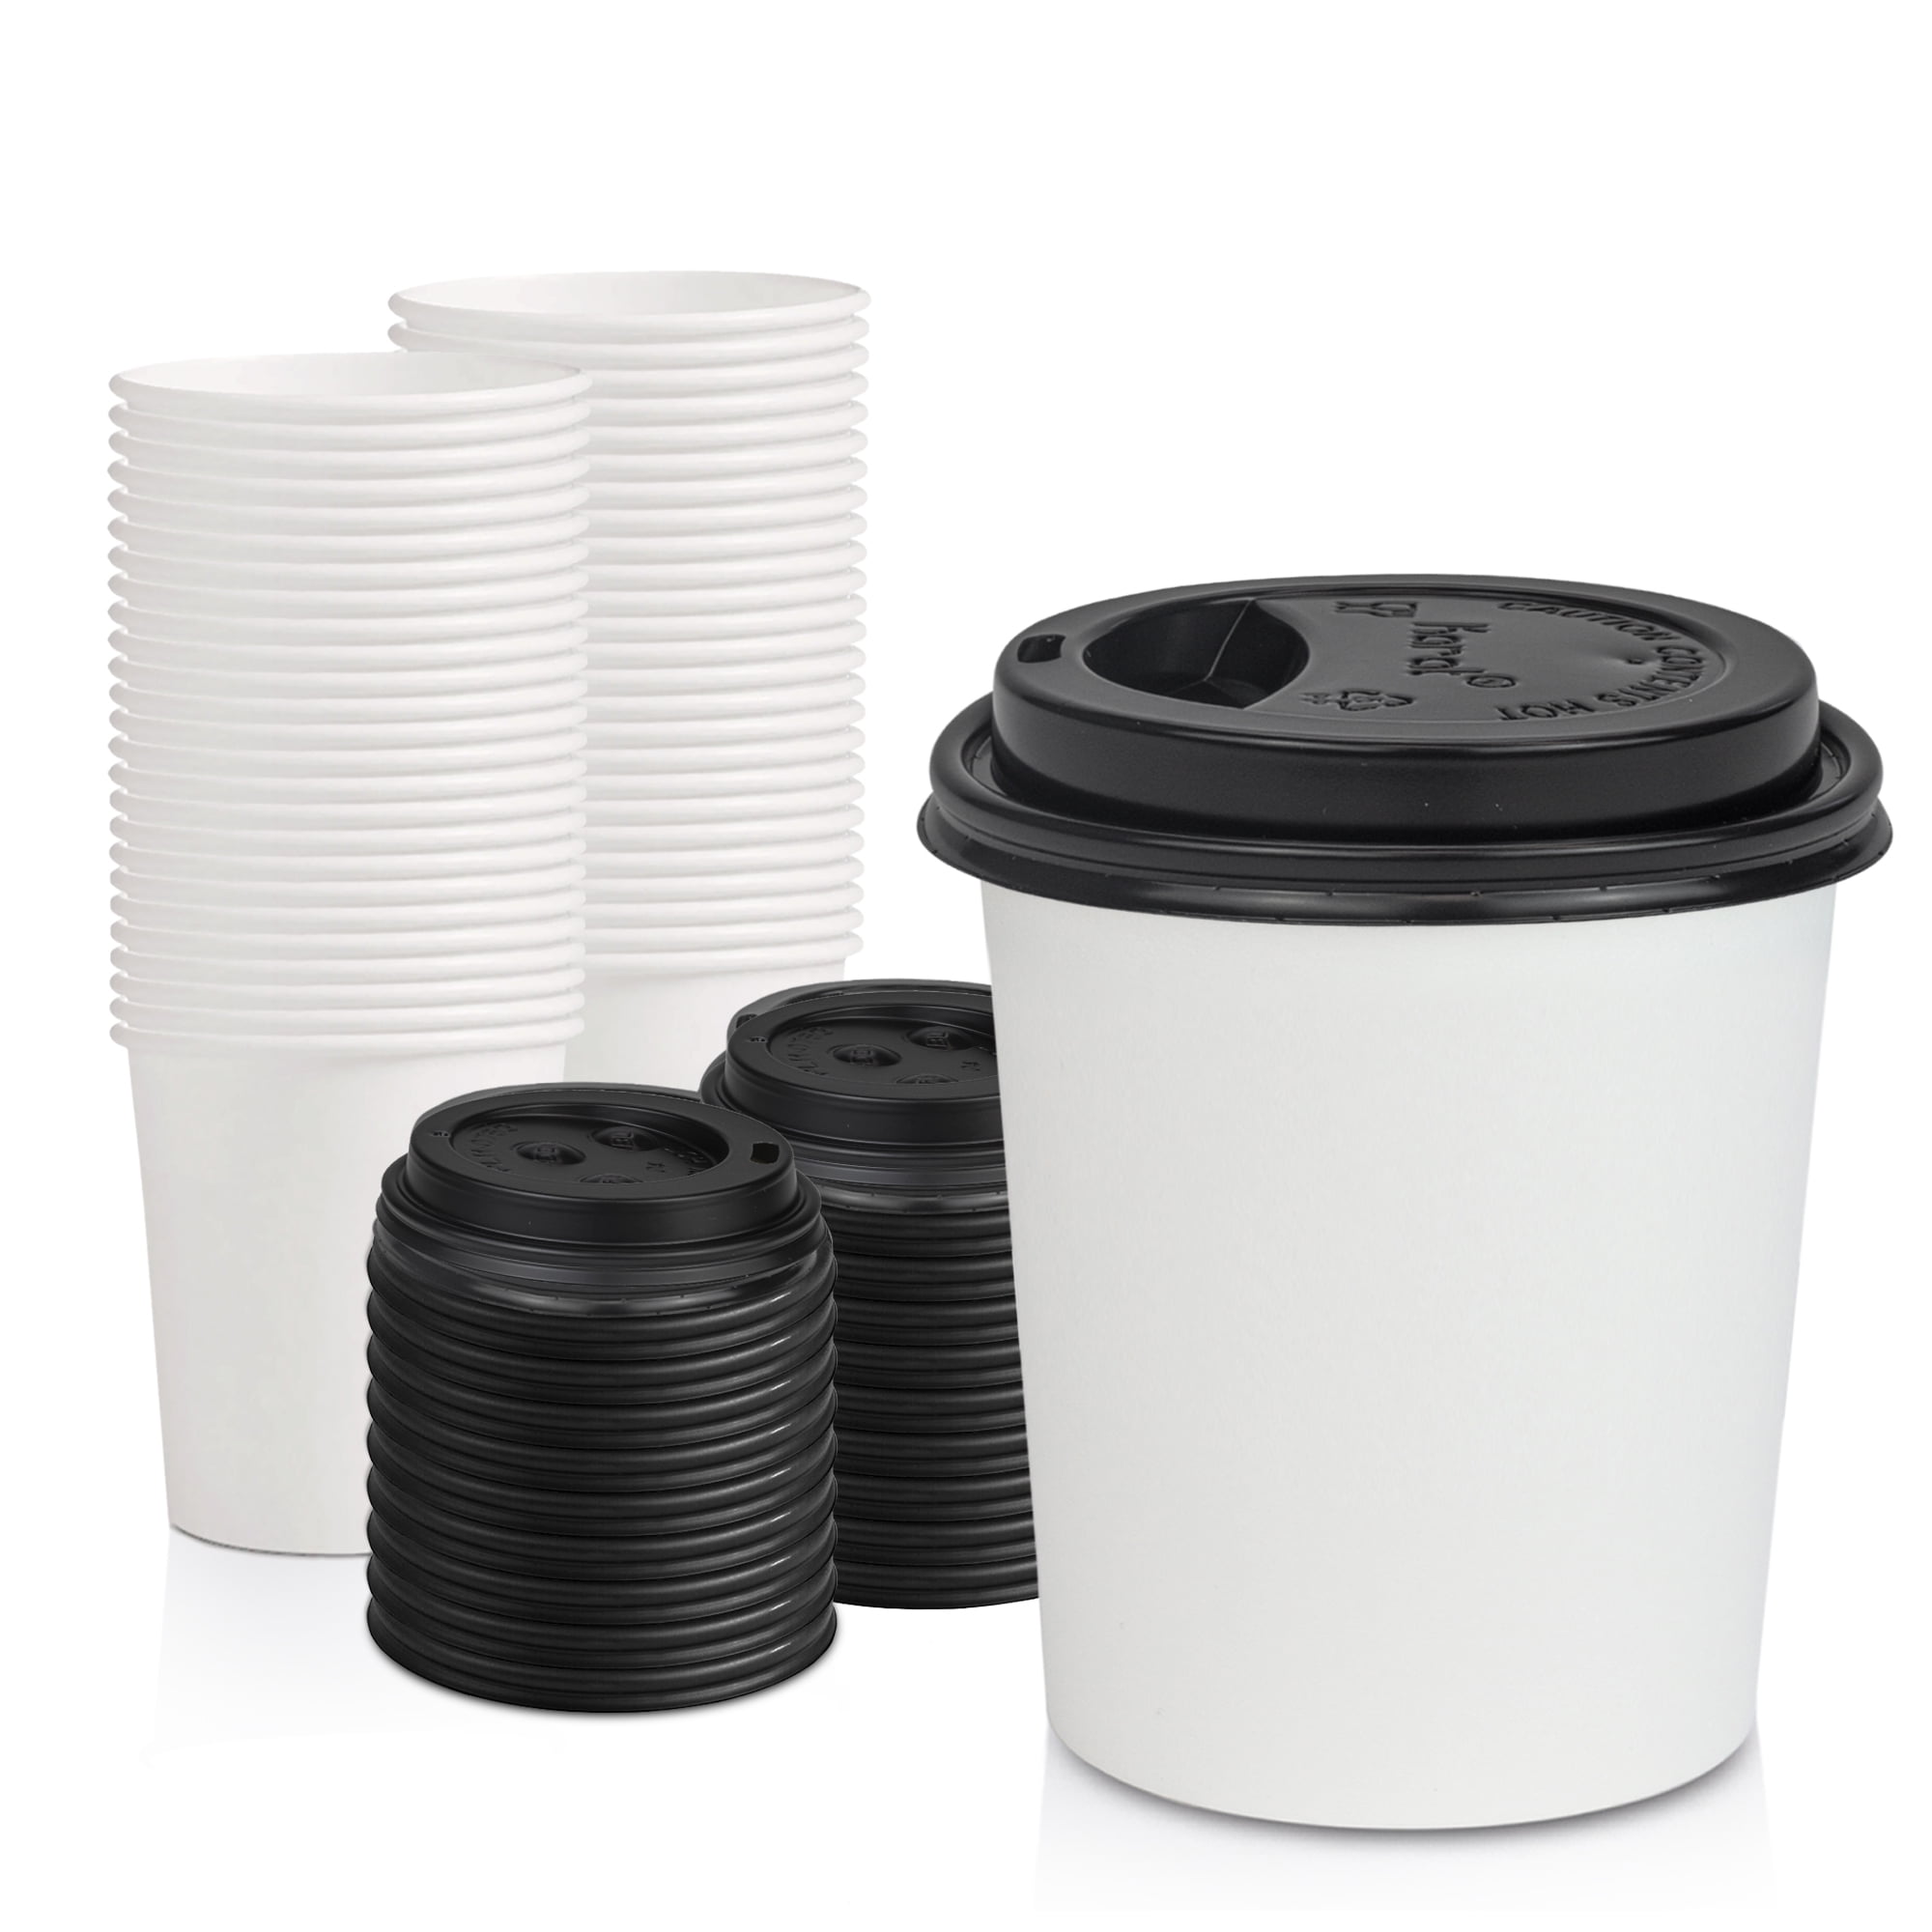 INSULATED RIPPLE HOT DRINKS PAPER CUPS 25 100 or 500 COFFEE DISPOSABLE LIDS 50 